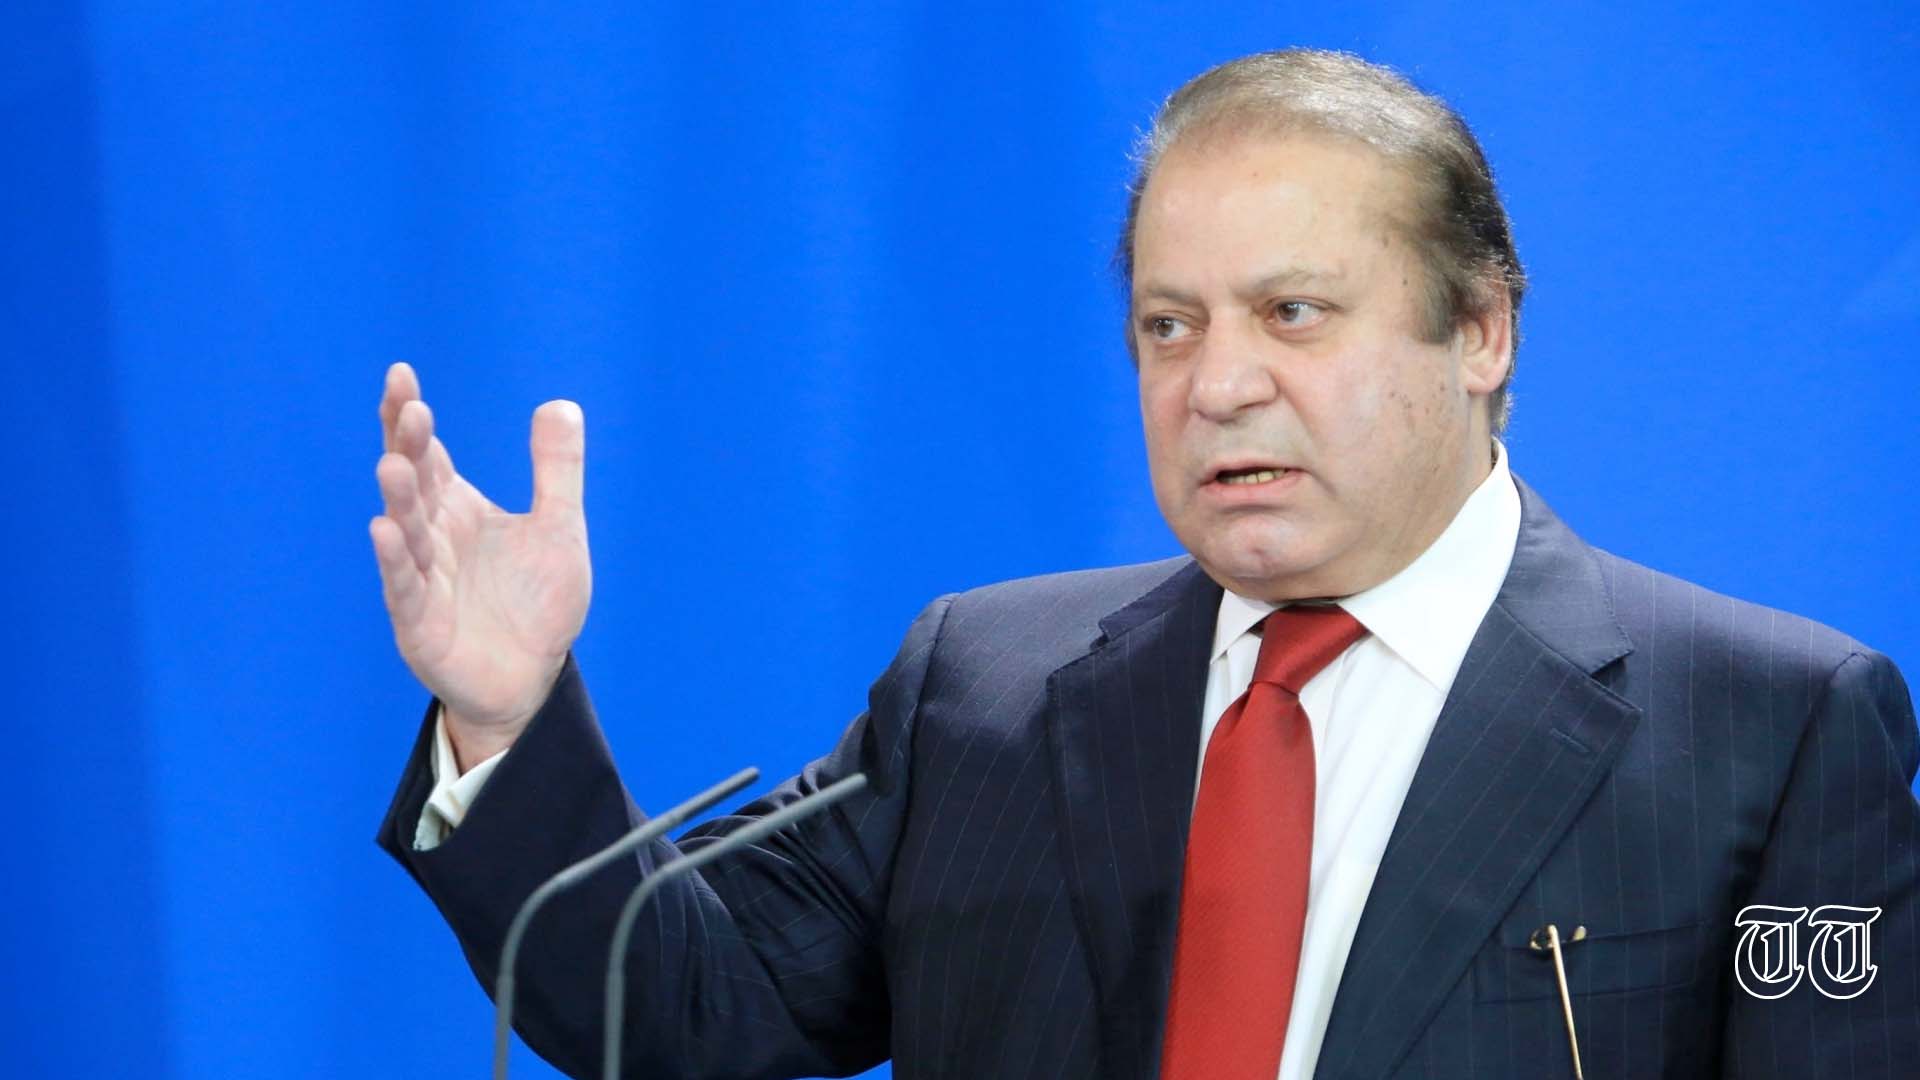 A file photo is shown of former prime minister Nawaz Sharif speaking at a conference in Berlin.